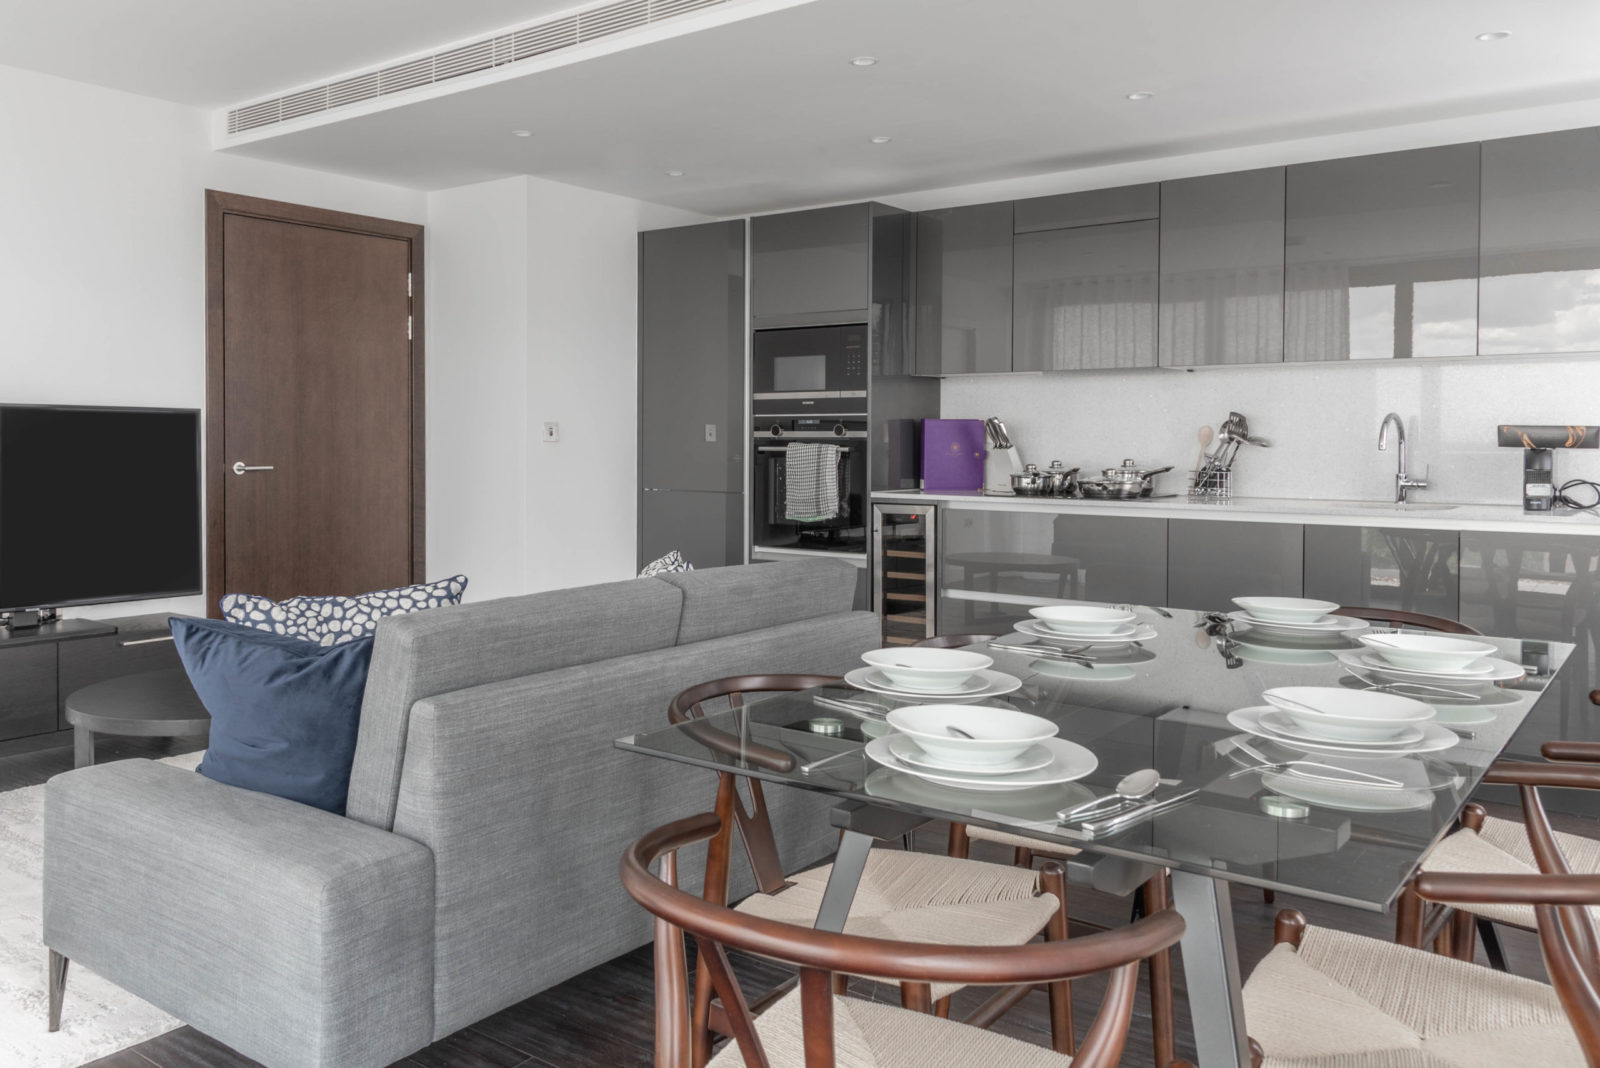 Tower-Hill-Serviced-Accommodation-with-lift,-reception,-pool,-gym,-jacuzzi,-garden-&-cinema!-Book-Luxury-Apartments-in-The-City-of-London-now-Urban-Stay